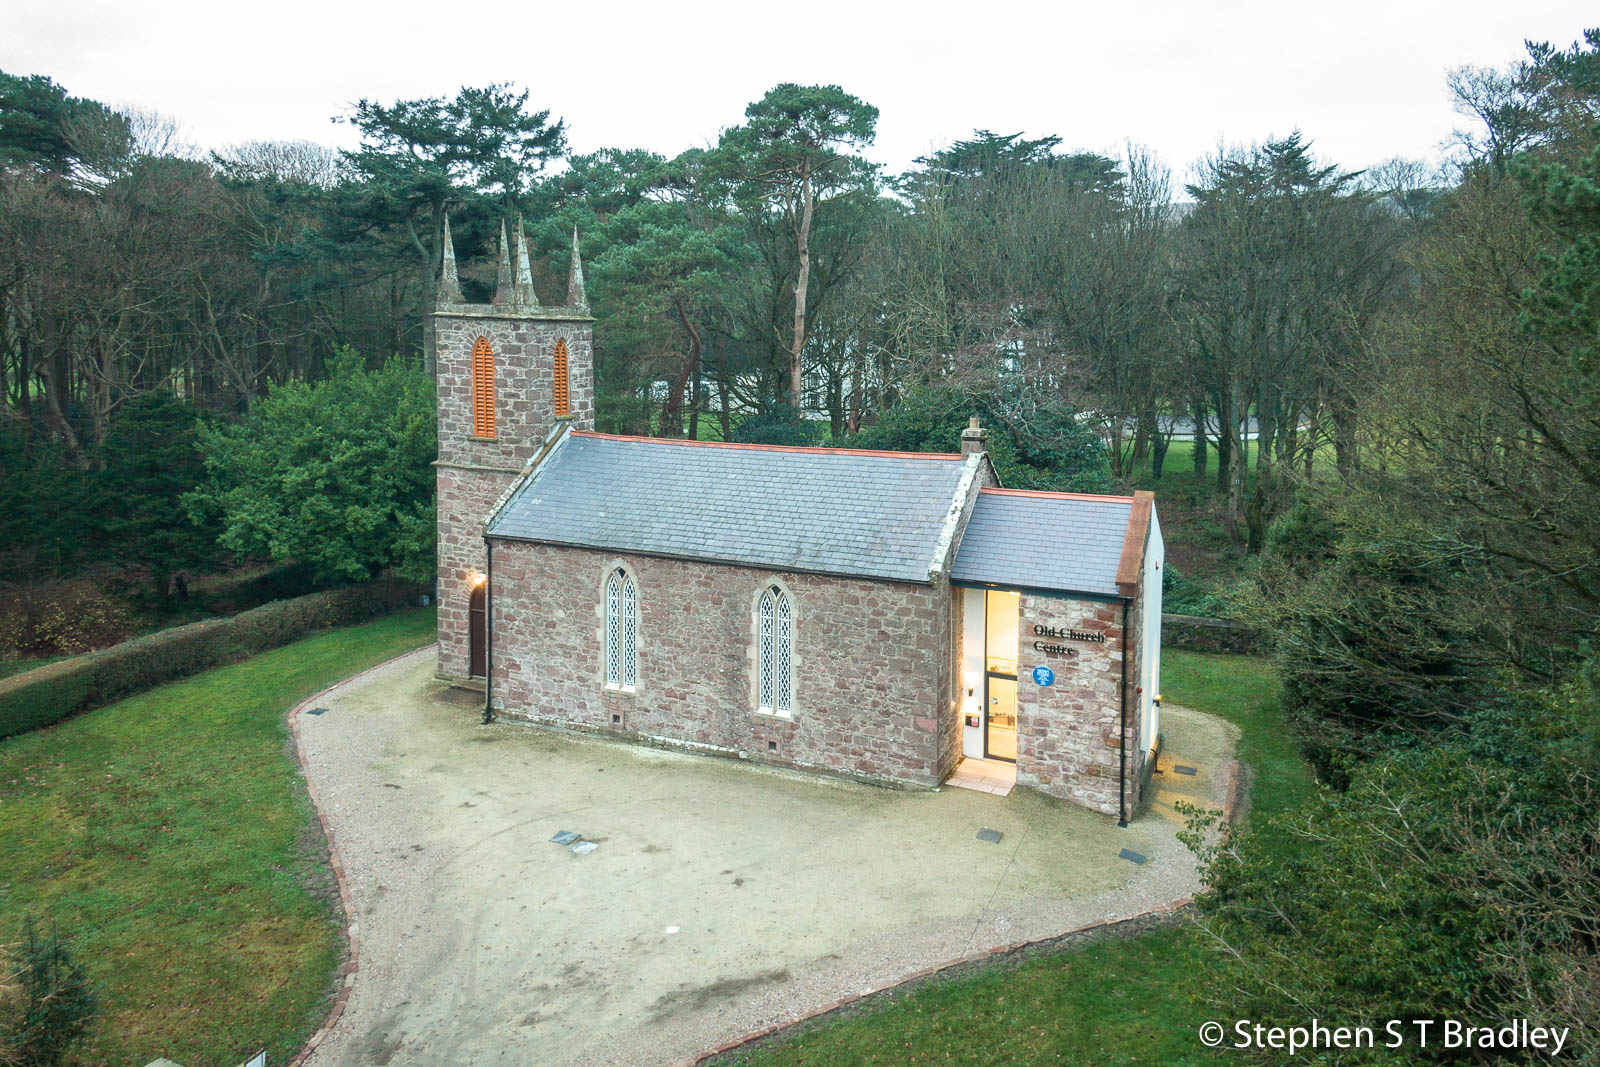 Aerial drone photography and video production services Dublin and Ireland portfolio - The Old Church Centre, Cushendun, aerial photo 0007